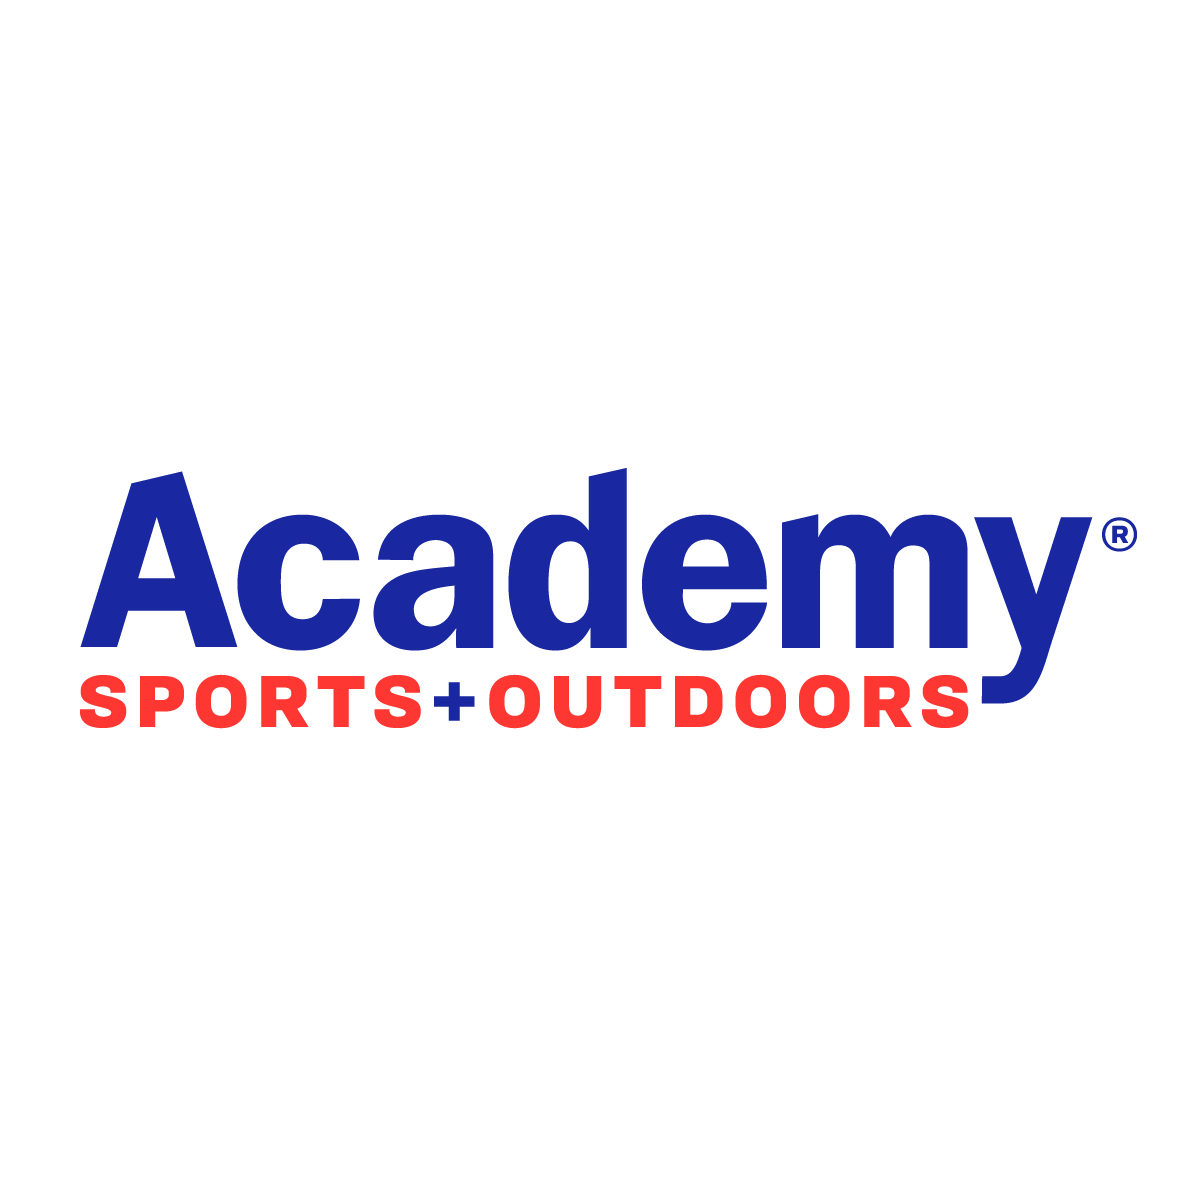 Sports & Outdoors